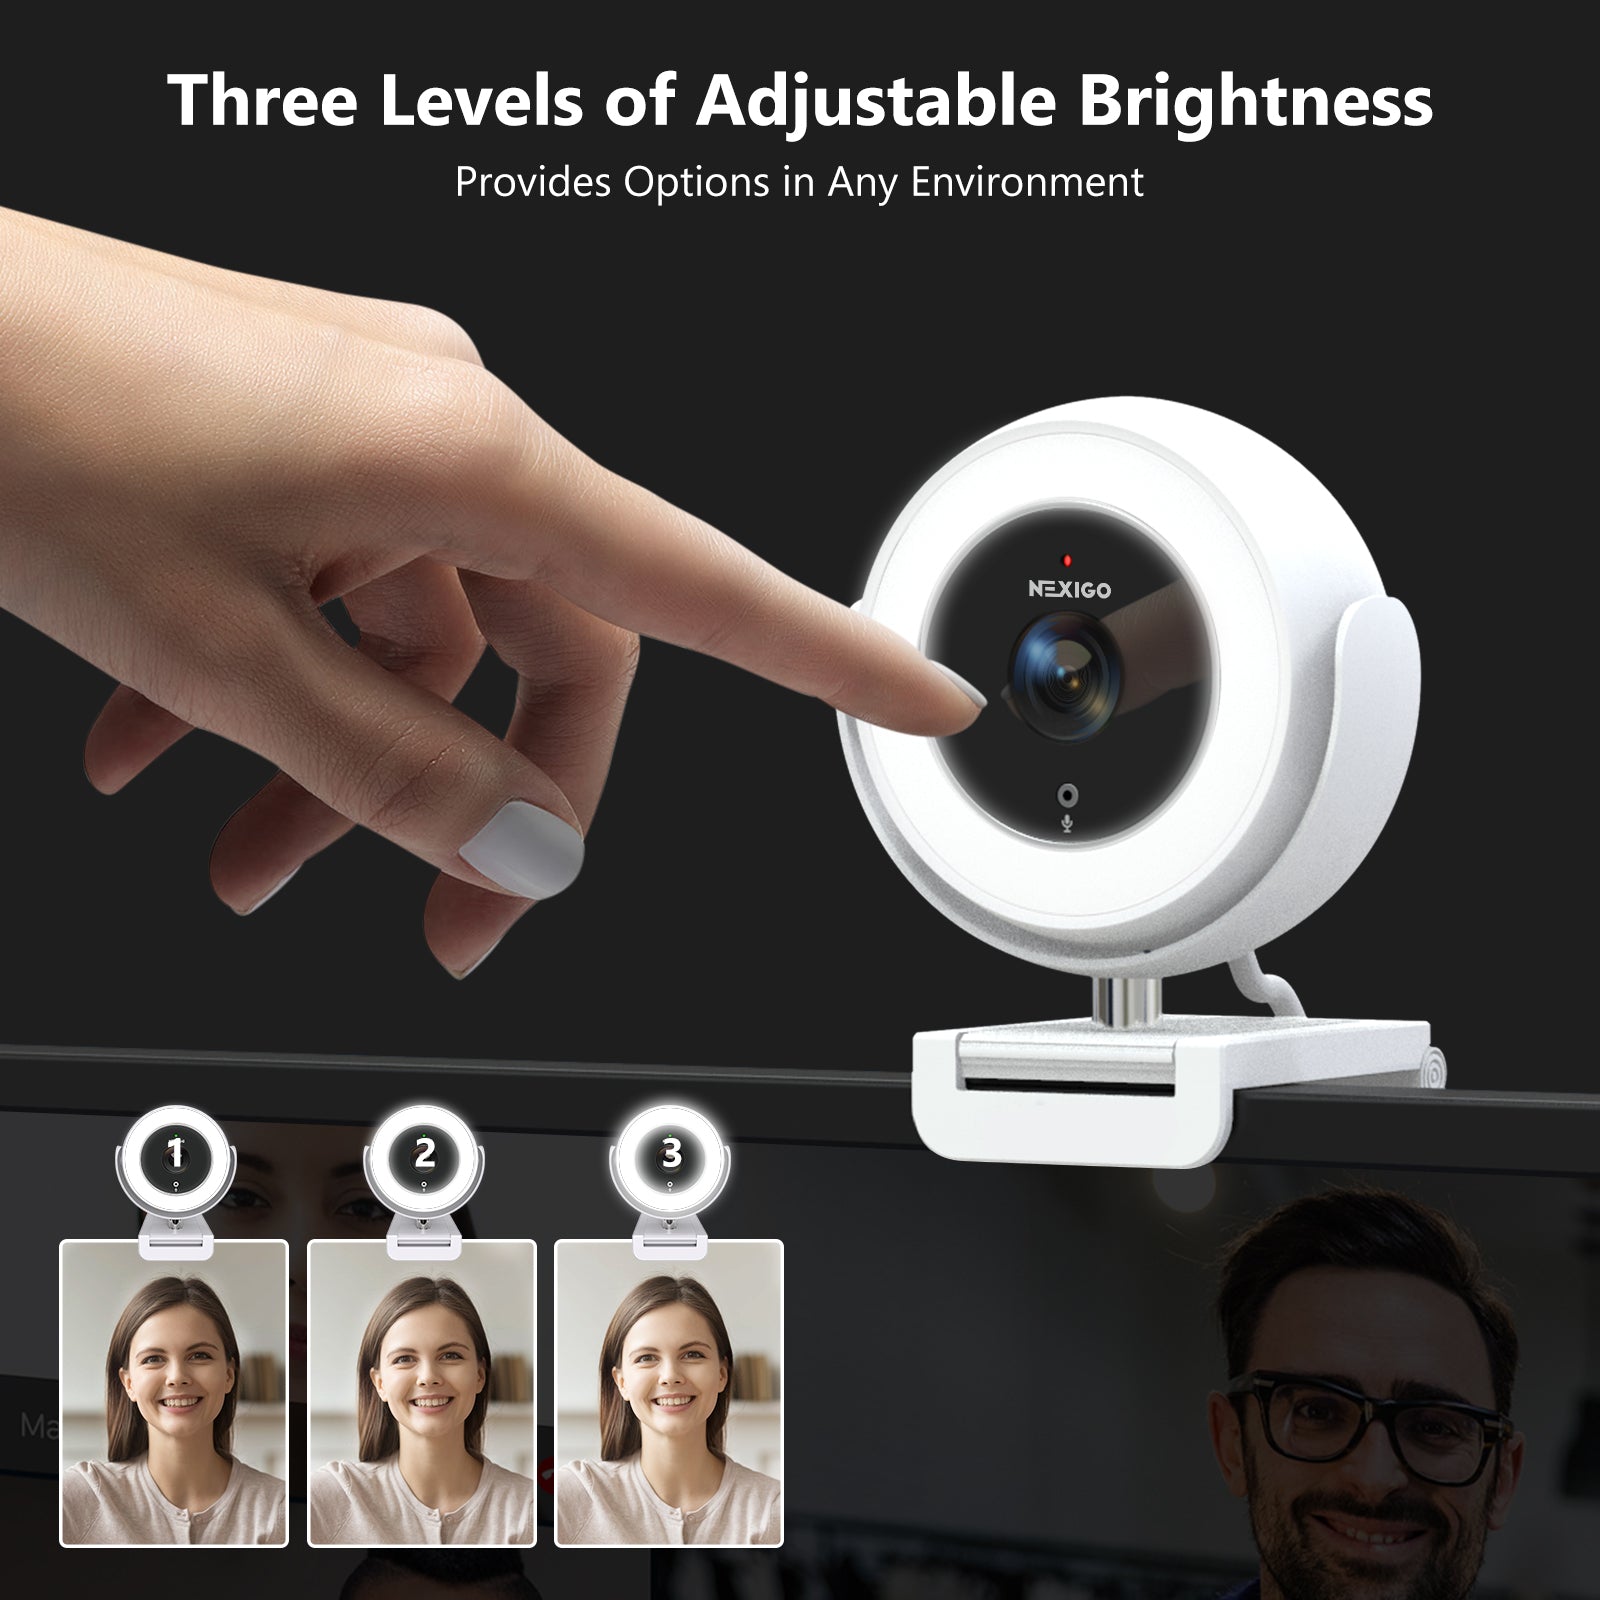 Adjust webcam brightness with a built-in ring light and 3 levels available by touching it.